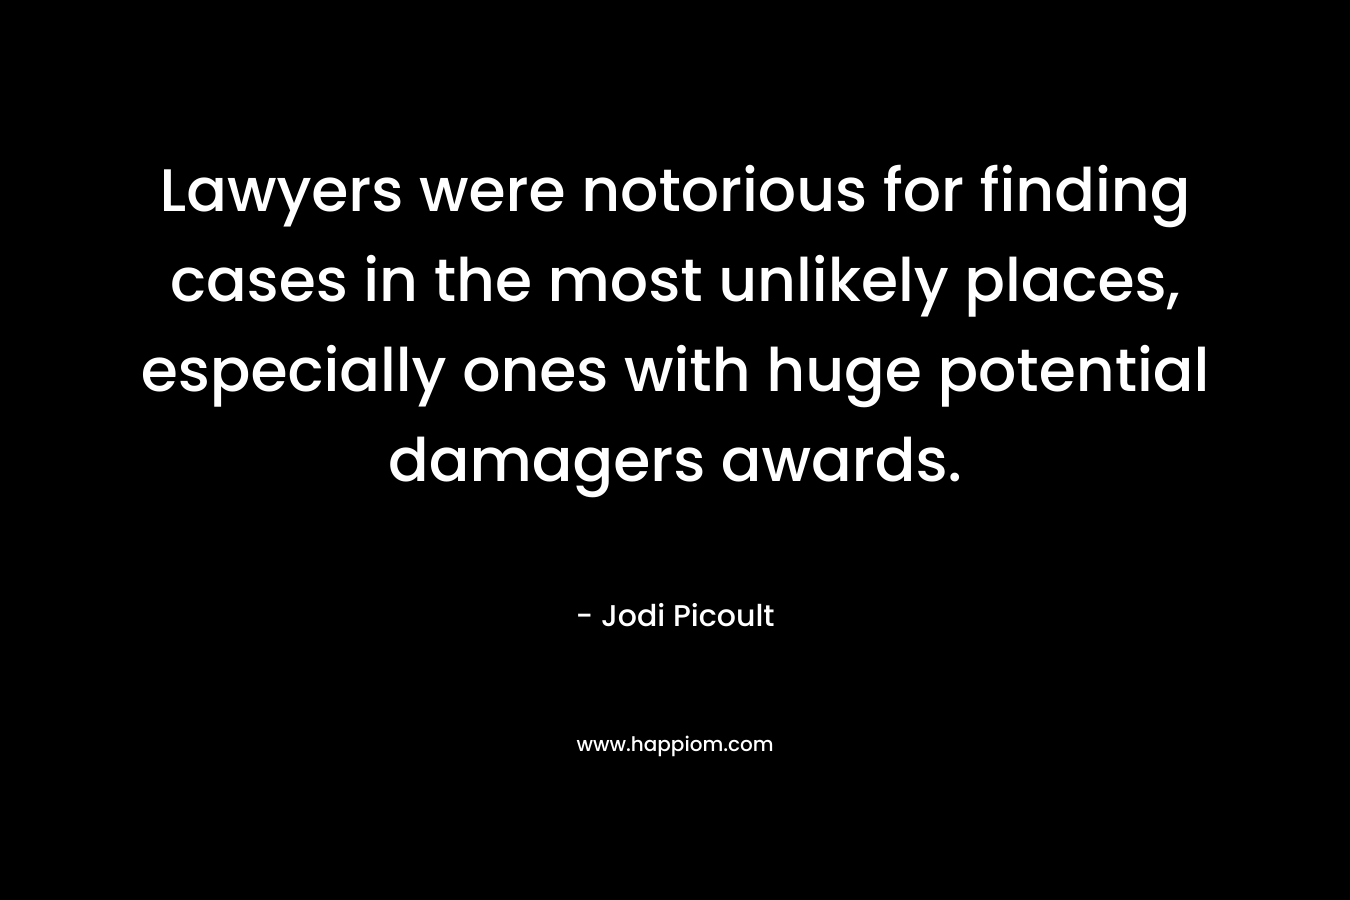 Lawyers were notorious for finding cases in the most unlikely places, especially ones with huge potential damagers awards.